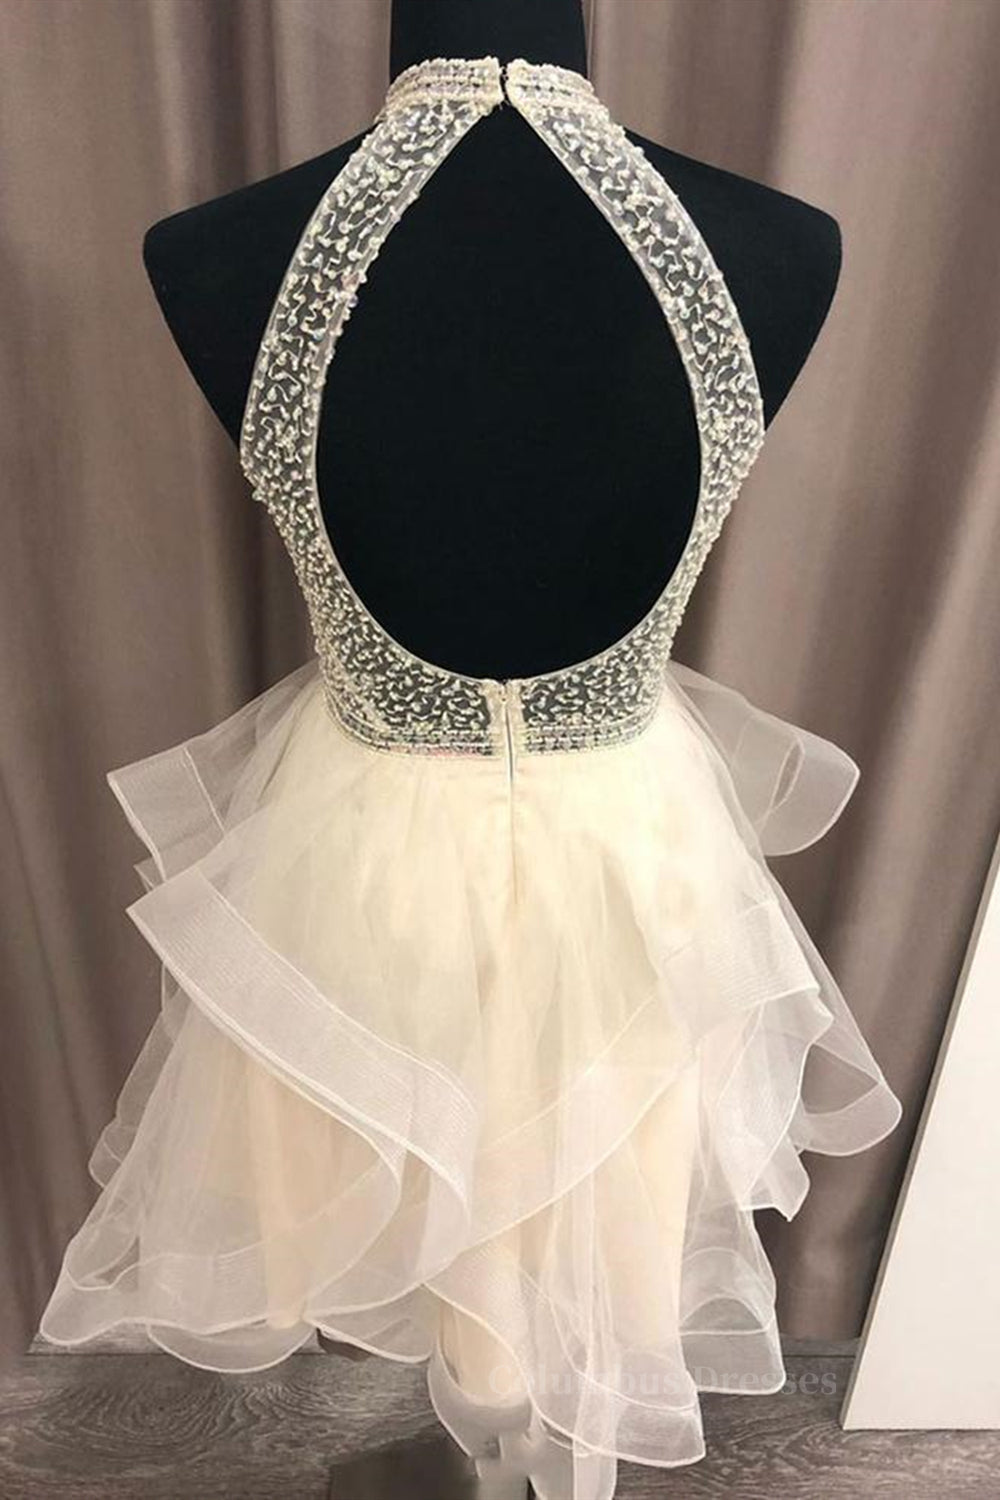 Party Dress Over 82, Cute Open Back Champagne Beaded Short Prom Dress, Fluffy Champagne Beaded Homecoming Dress